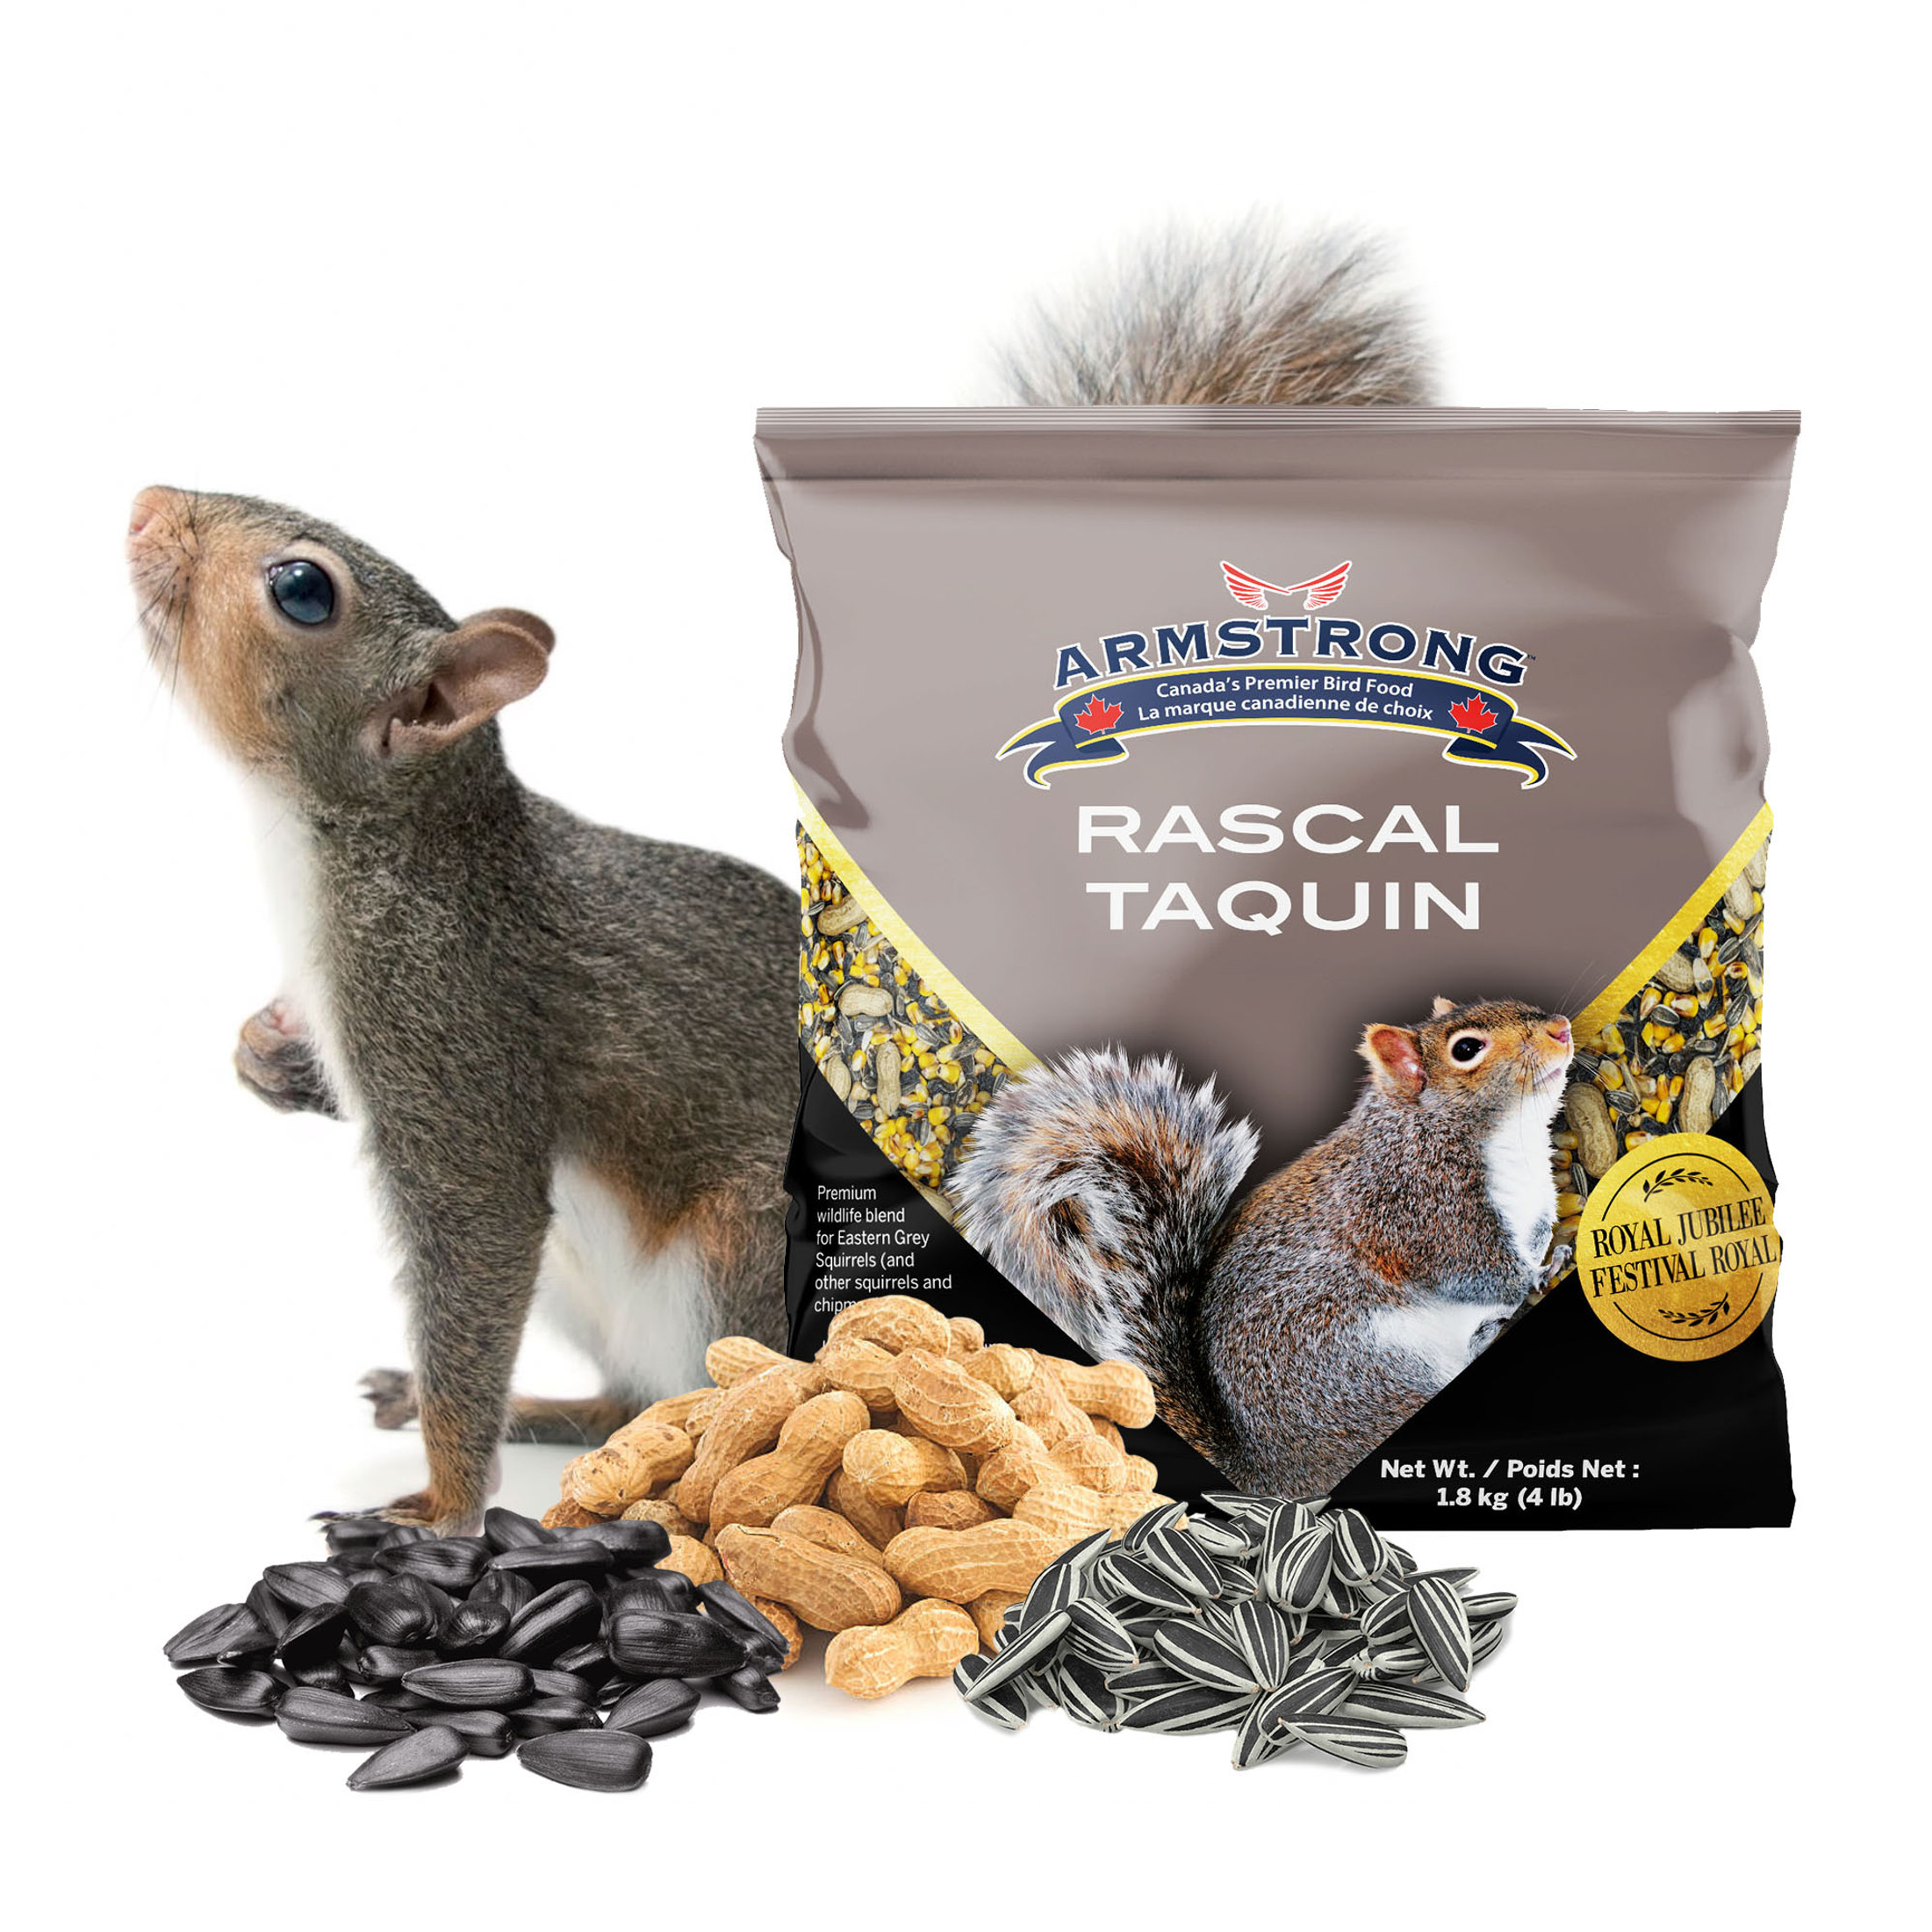 Armstrong Wild Animal Food Royal Jubilee Rascal Seed Mix For Squirrels and Chipmunks, 4lbs